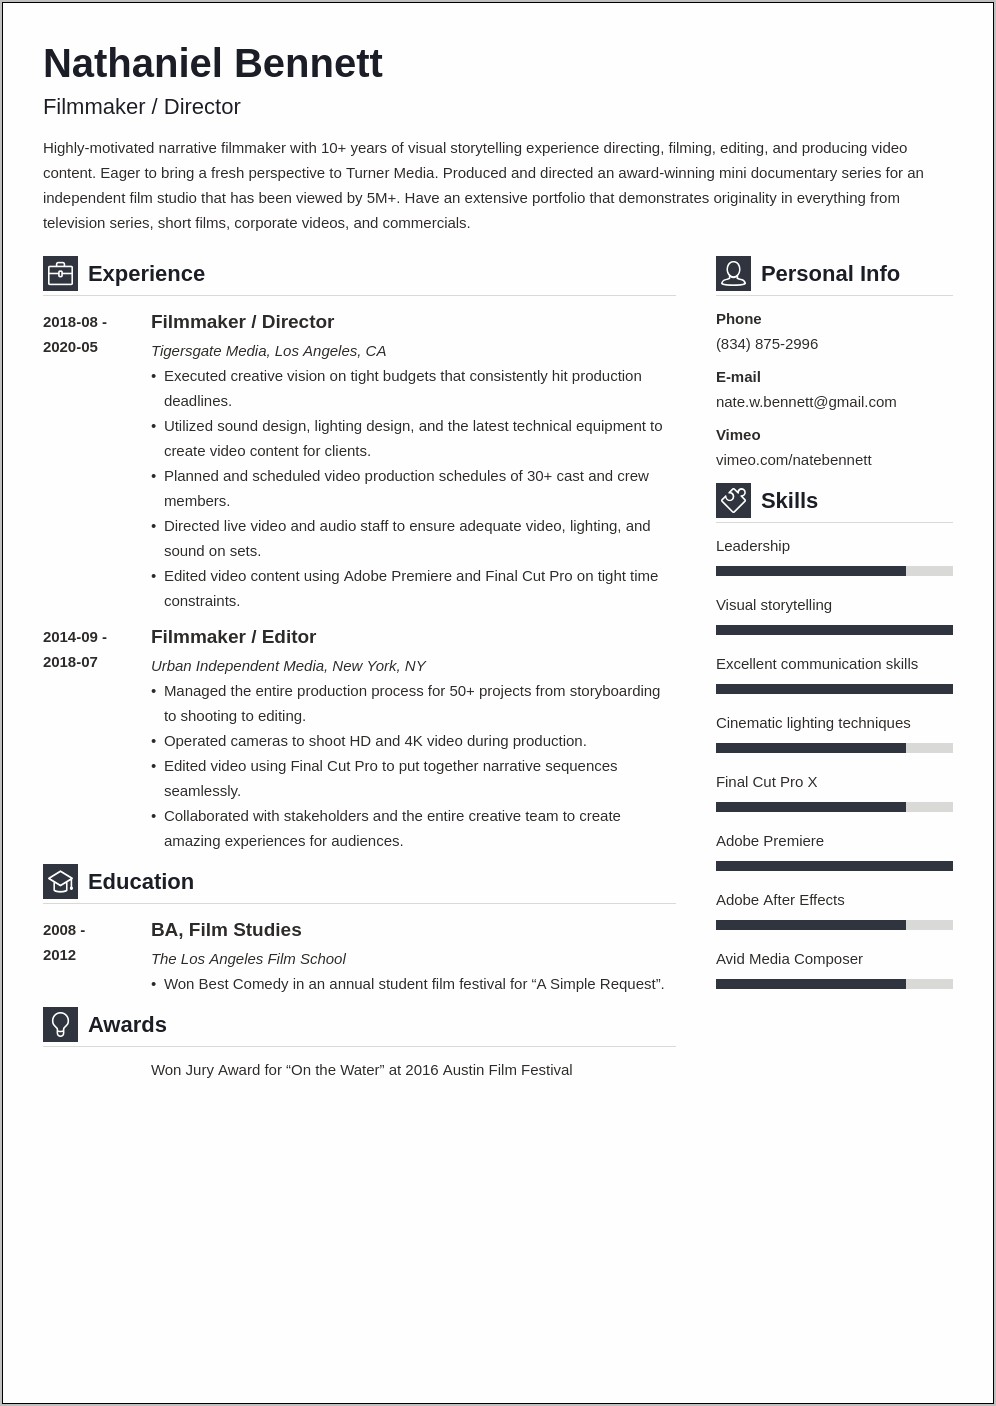 Cool Resume Templates For Film Makers